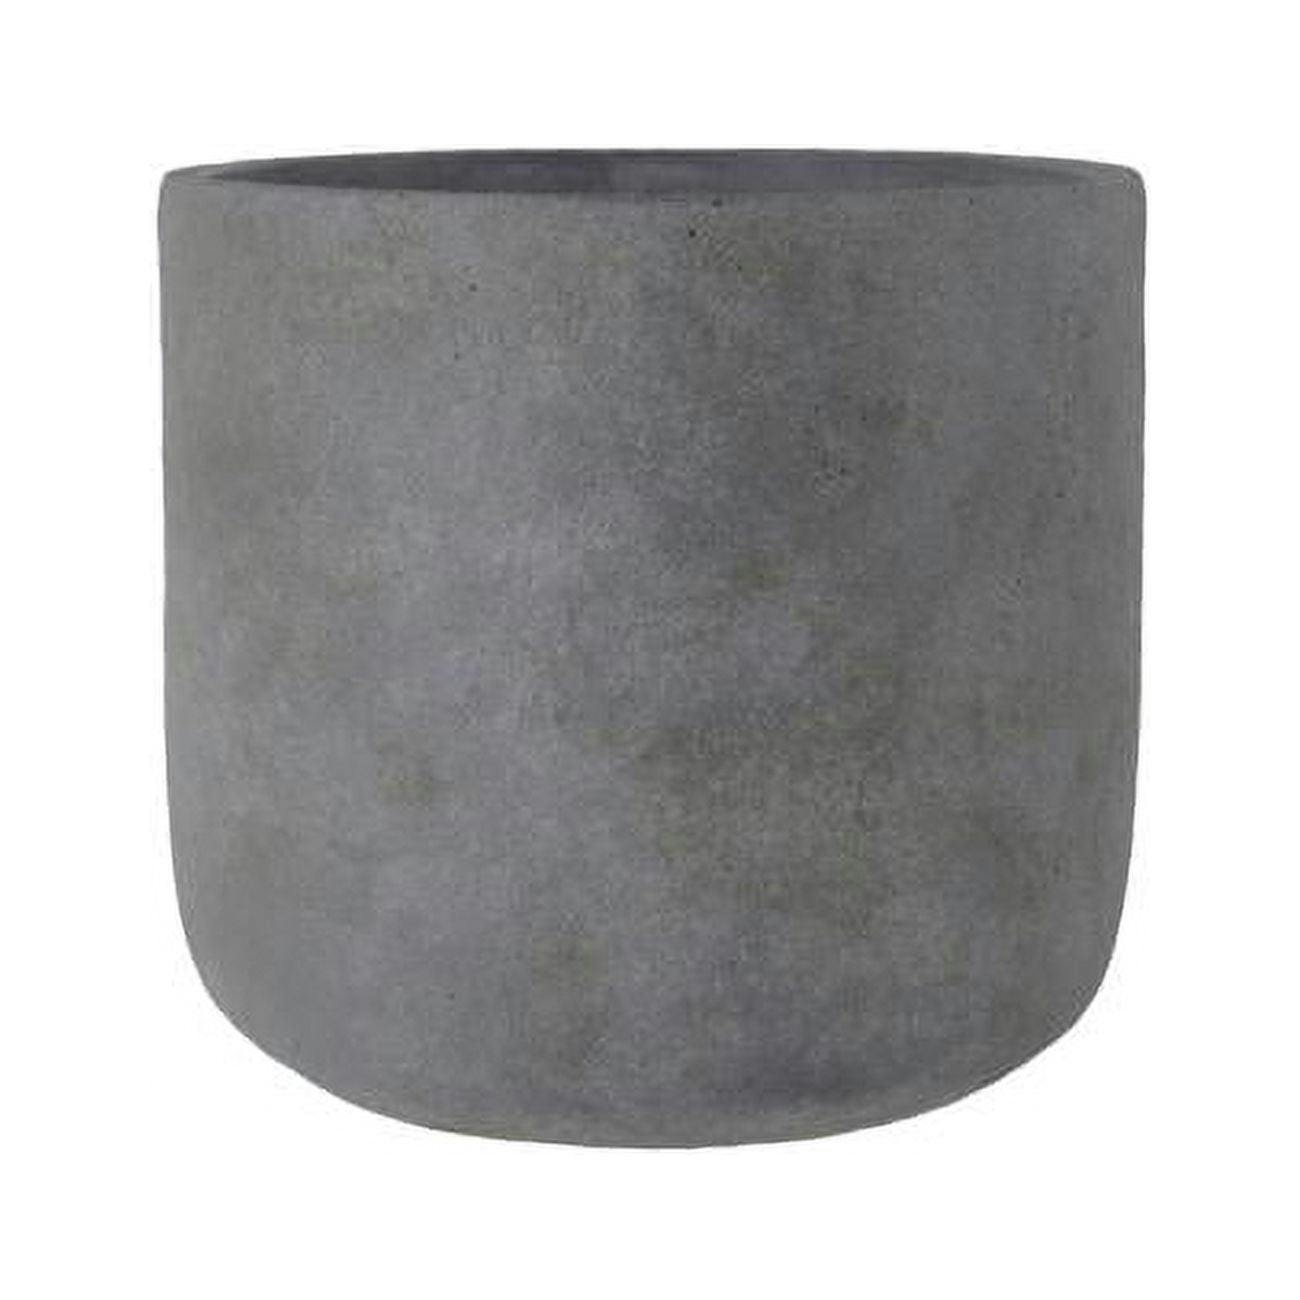 Large Round Terracotta Pot in Dark Gray with Rough Finish